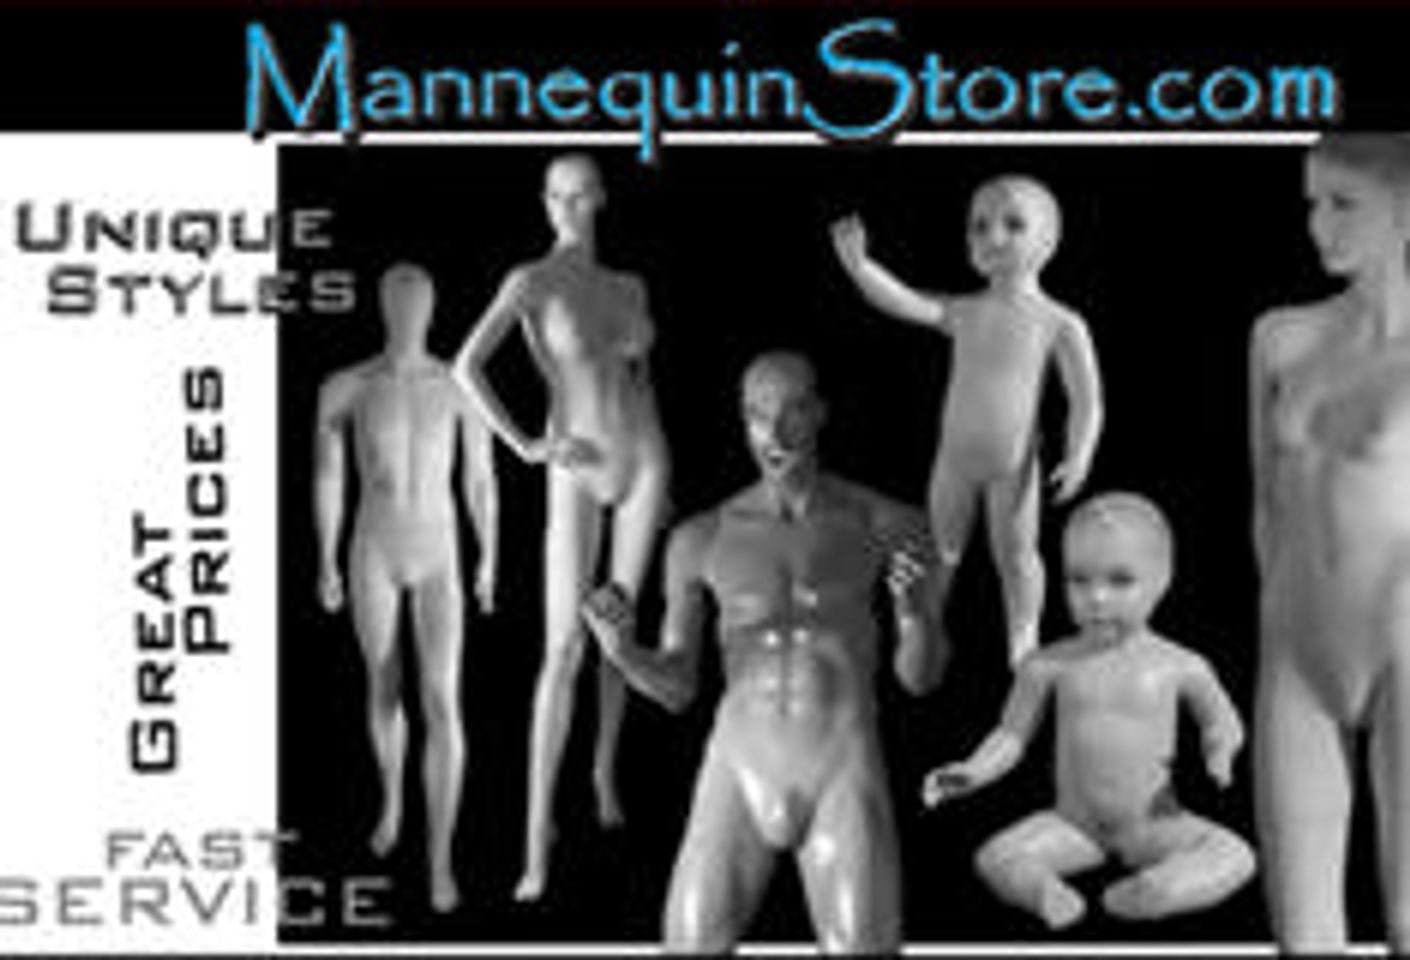 Mannequin Store Figures it Out